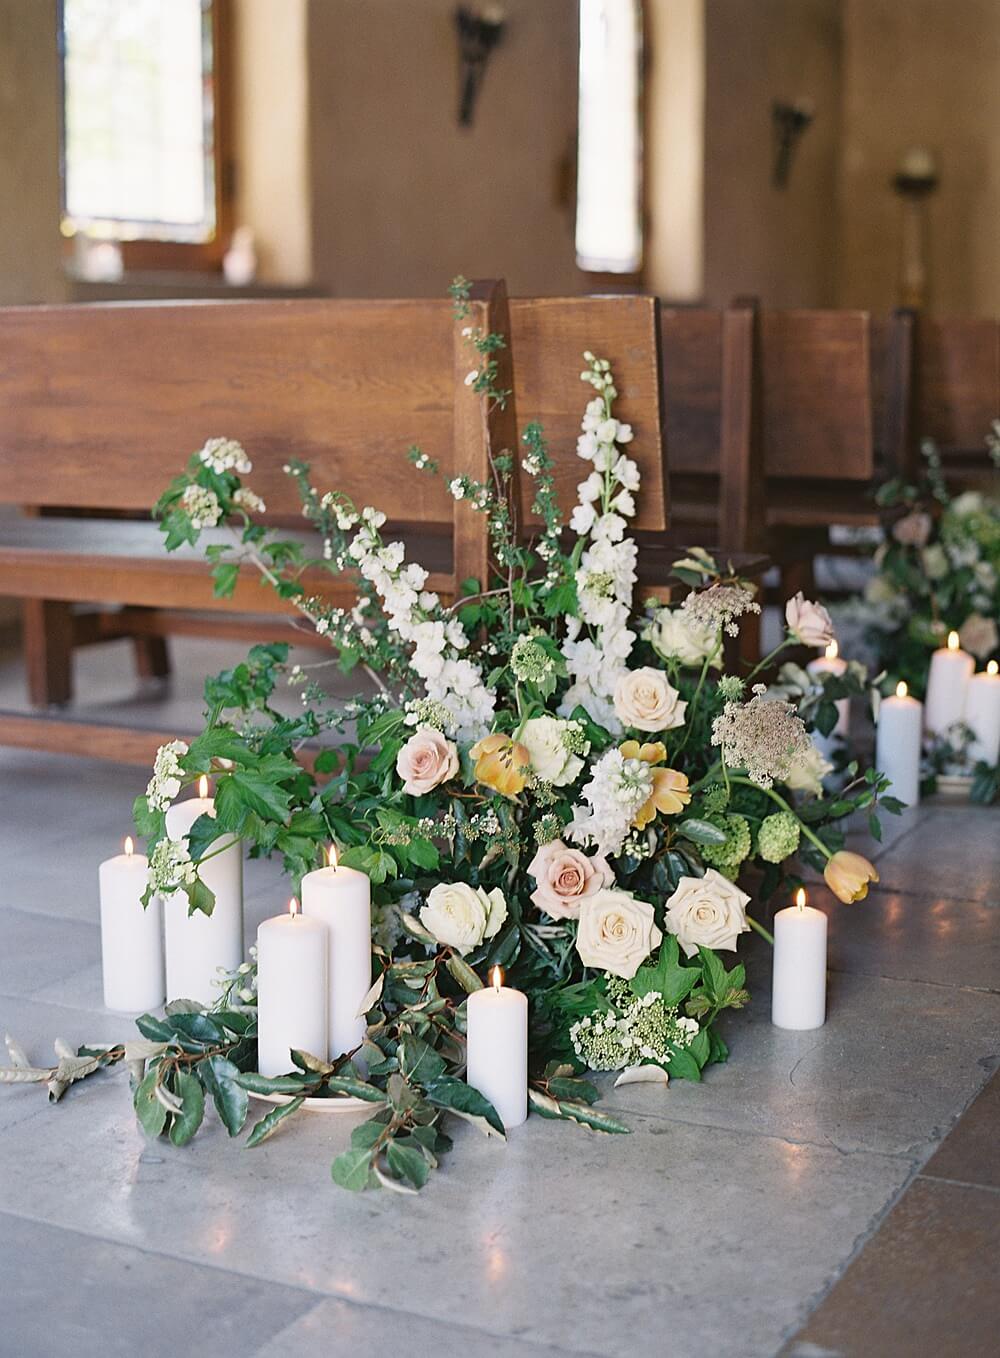 Peach and cream florals line the aisle in the stone chapel at a cal-a-vie wedding - Jacqueline Benét Photography